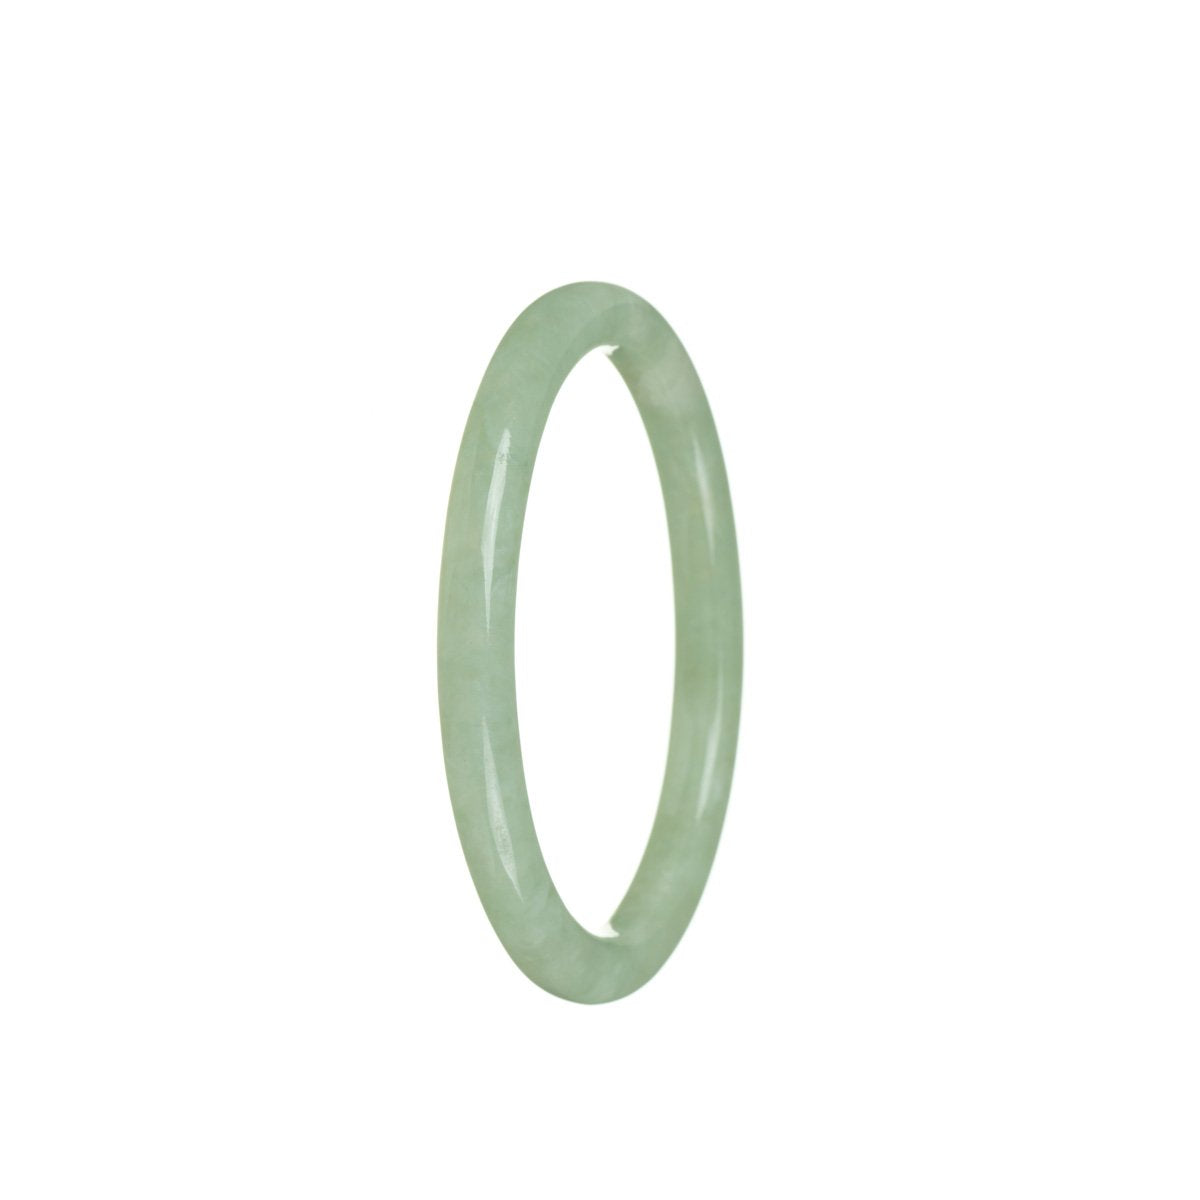 A close-up image of a genuine Grade A Green Burmese Jade Bangle, featuring an oval shape measuring 52mm. The bangle is beautifully crafted and exudes a luxurious and earthy feel. The rich green color of the jade is captivating, making it a stunning piece of jewelry.